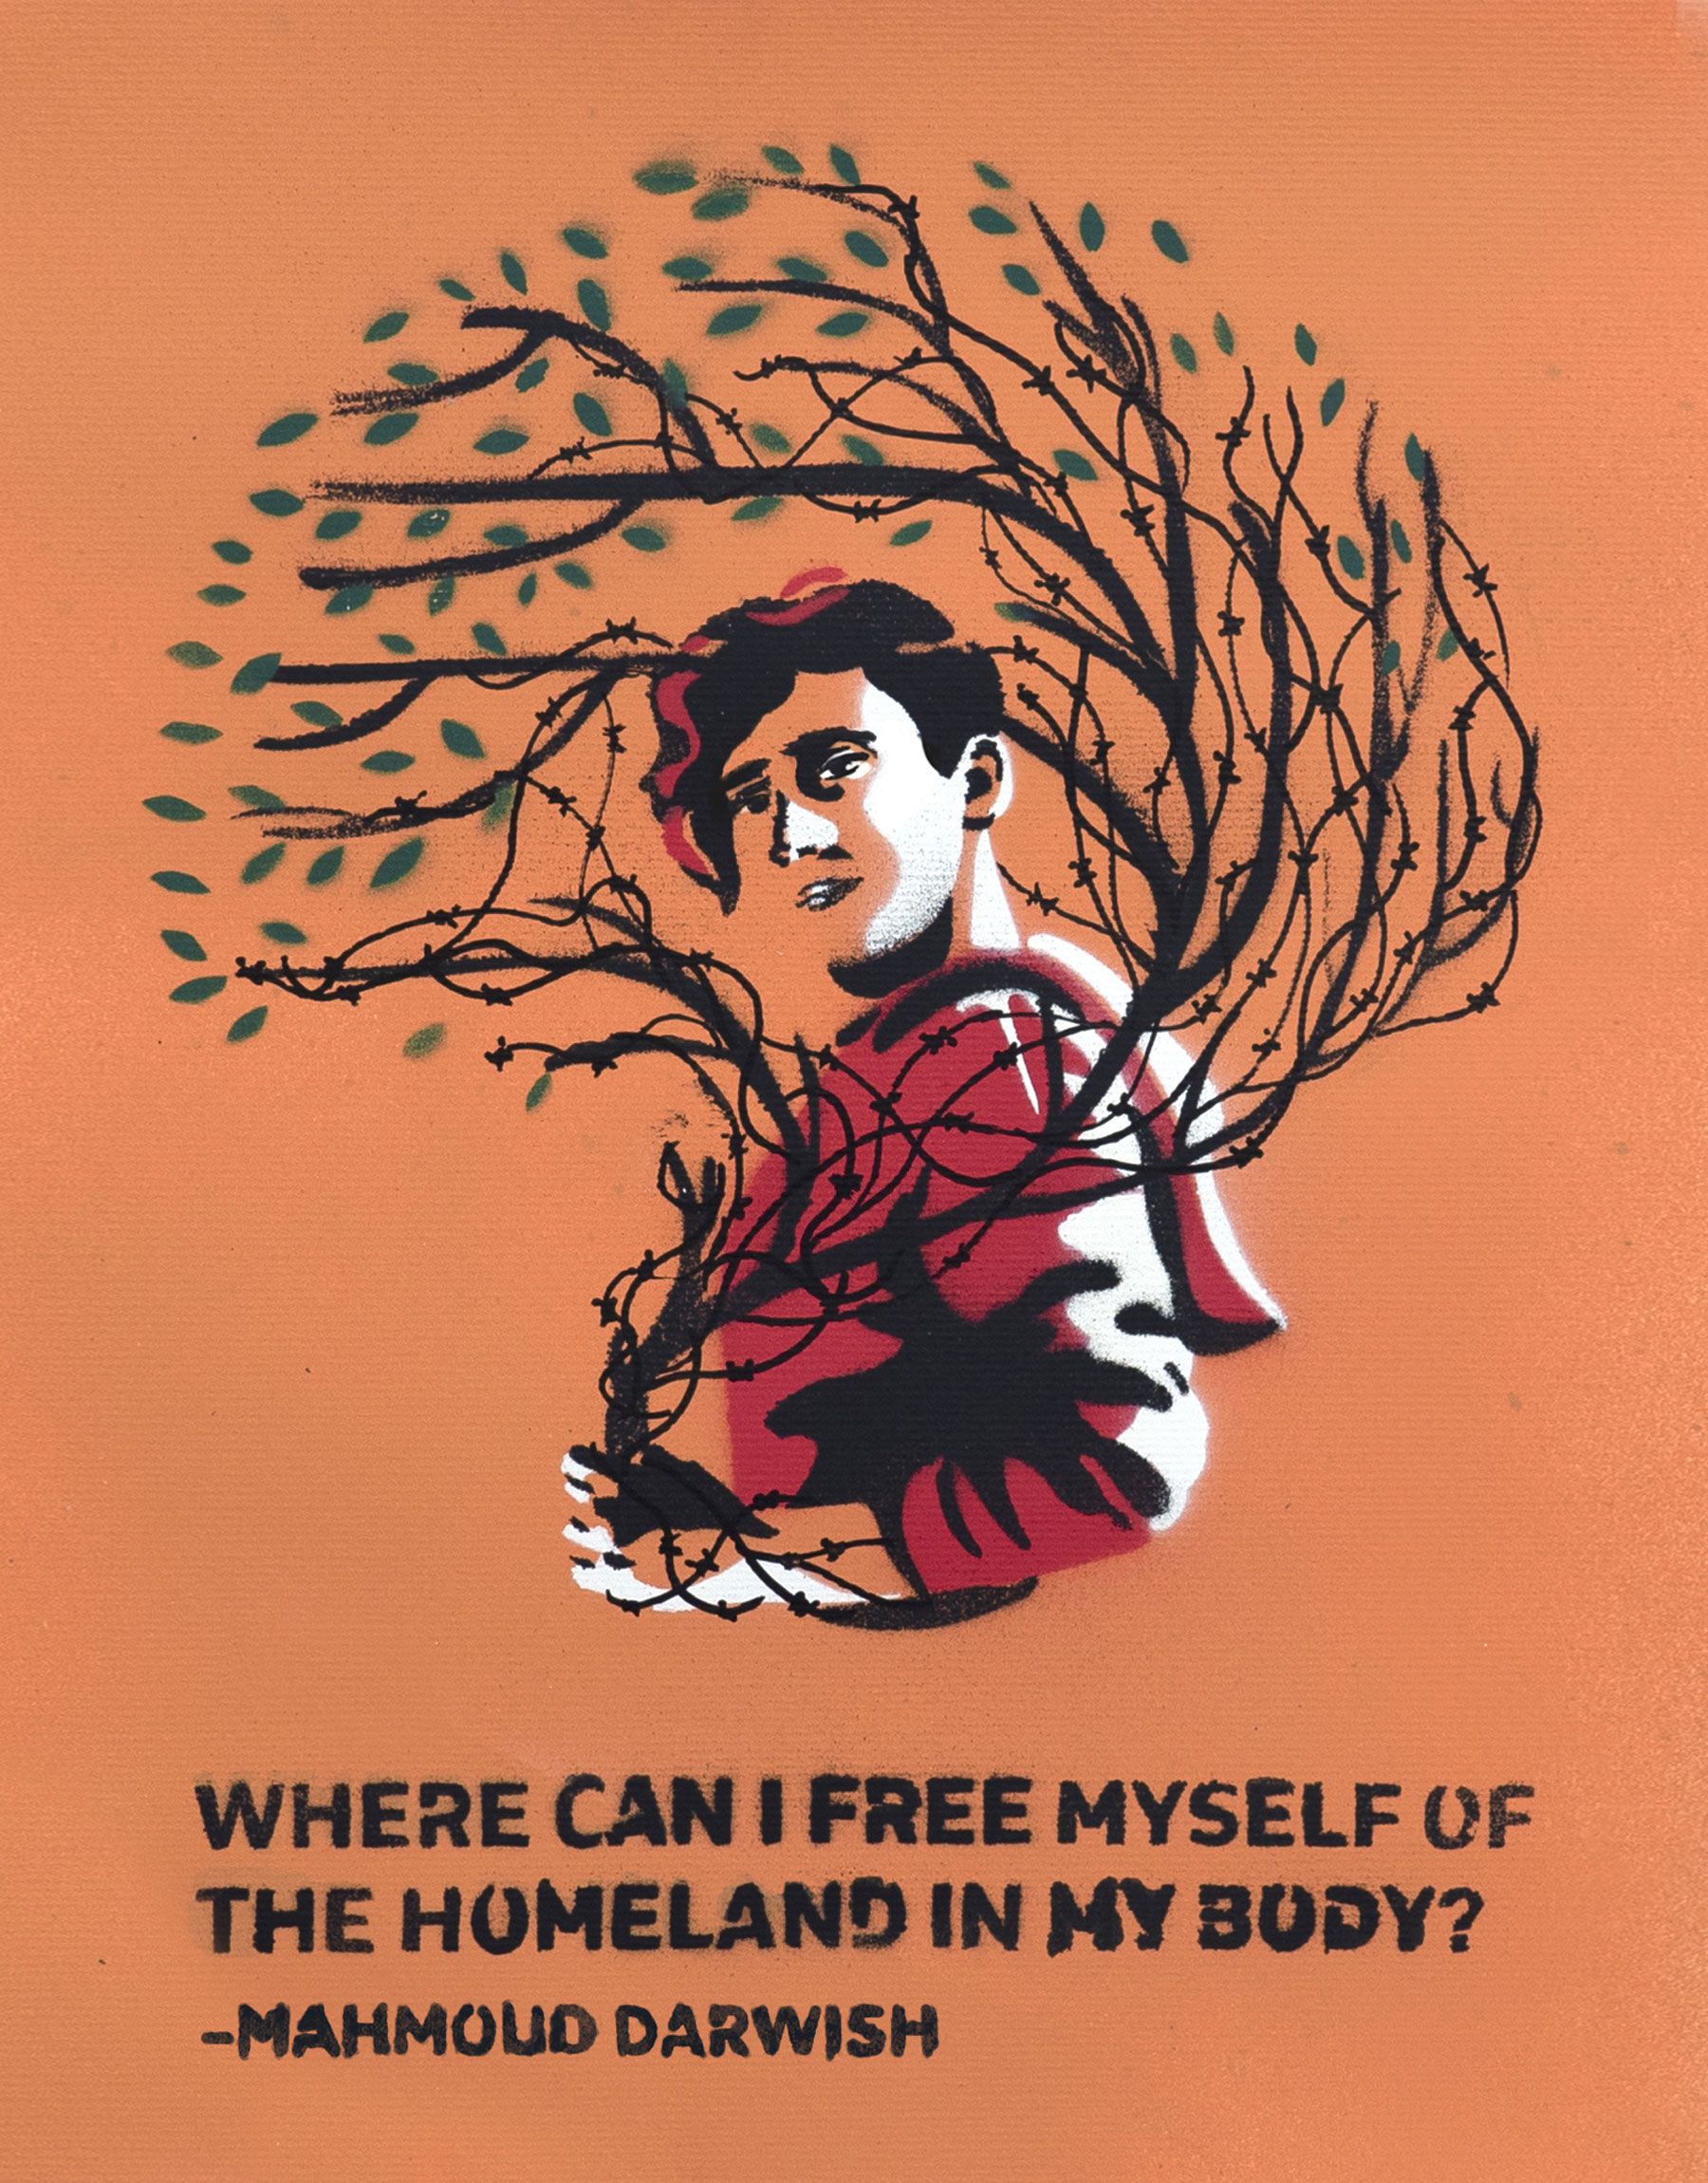 Where can I free myself of the homeland in my body - stencil illustration